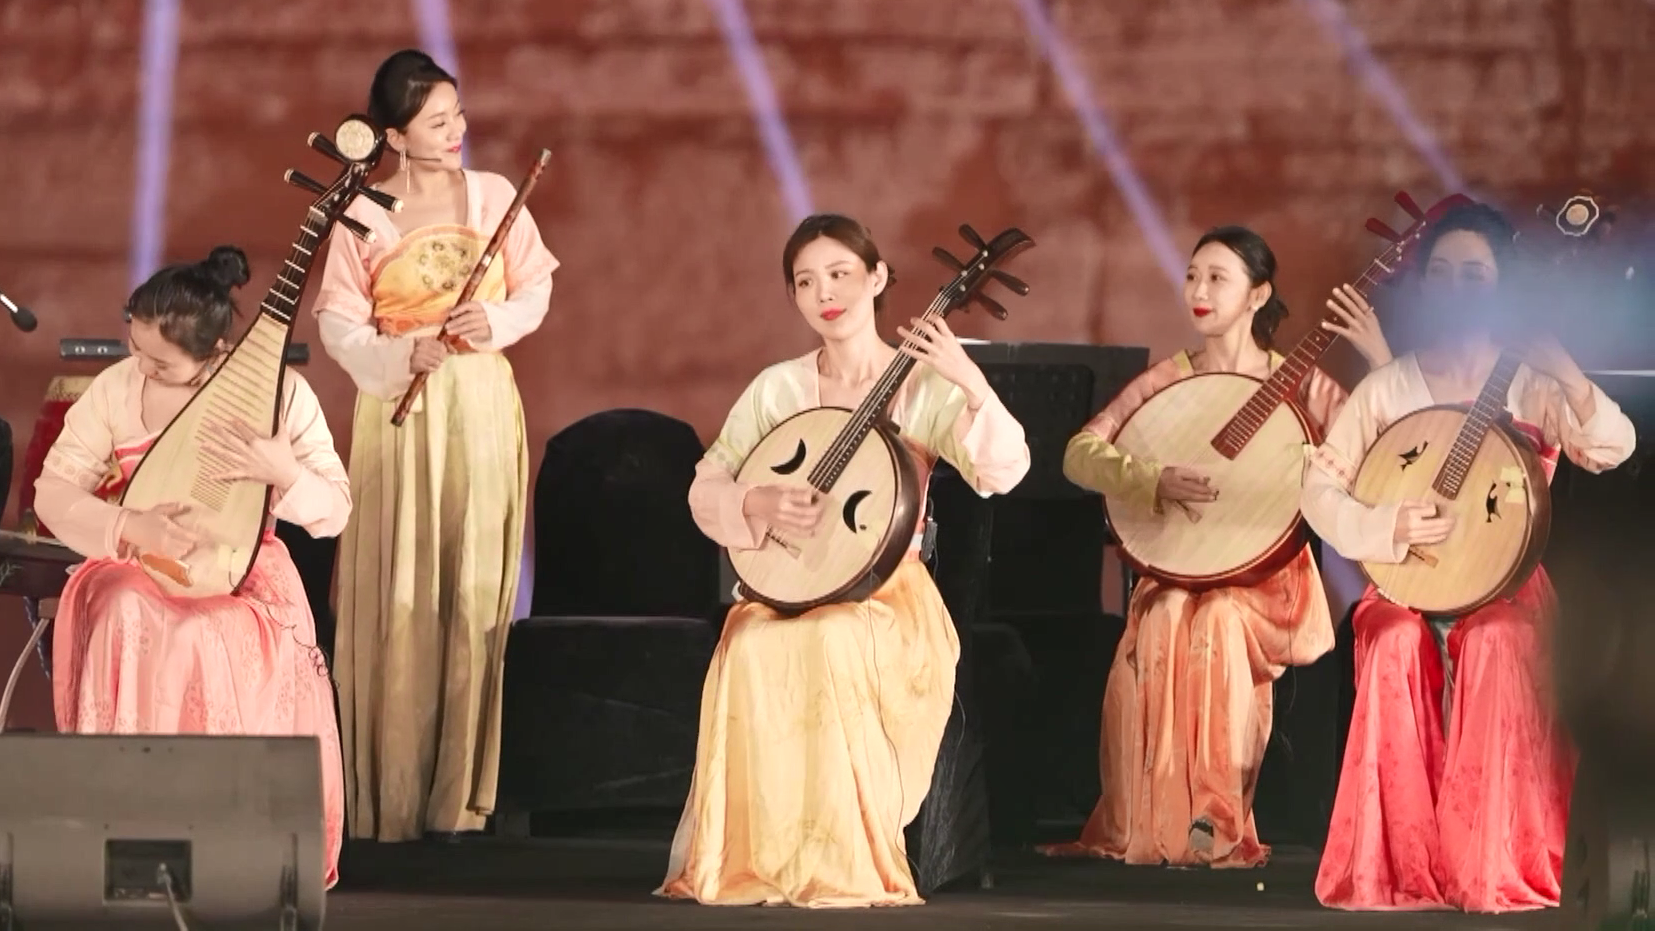 Musicians perform at the foot of Egypt’s architectural icons. /CGTN